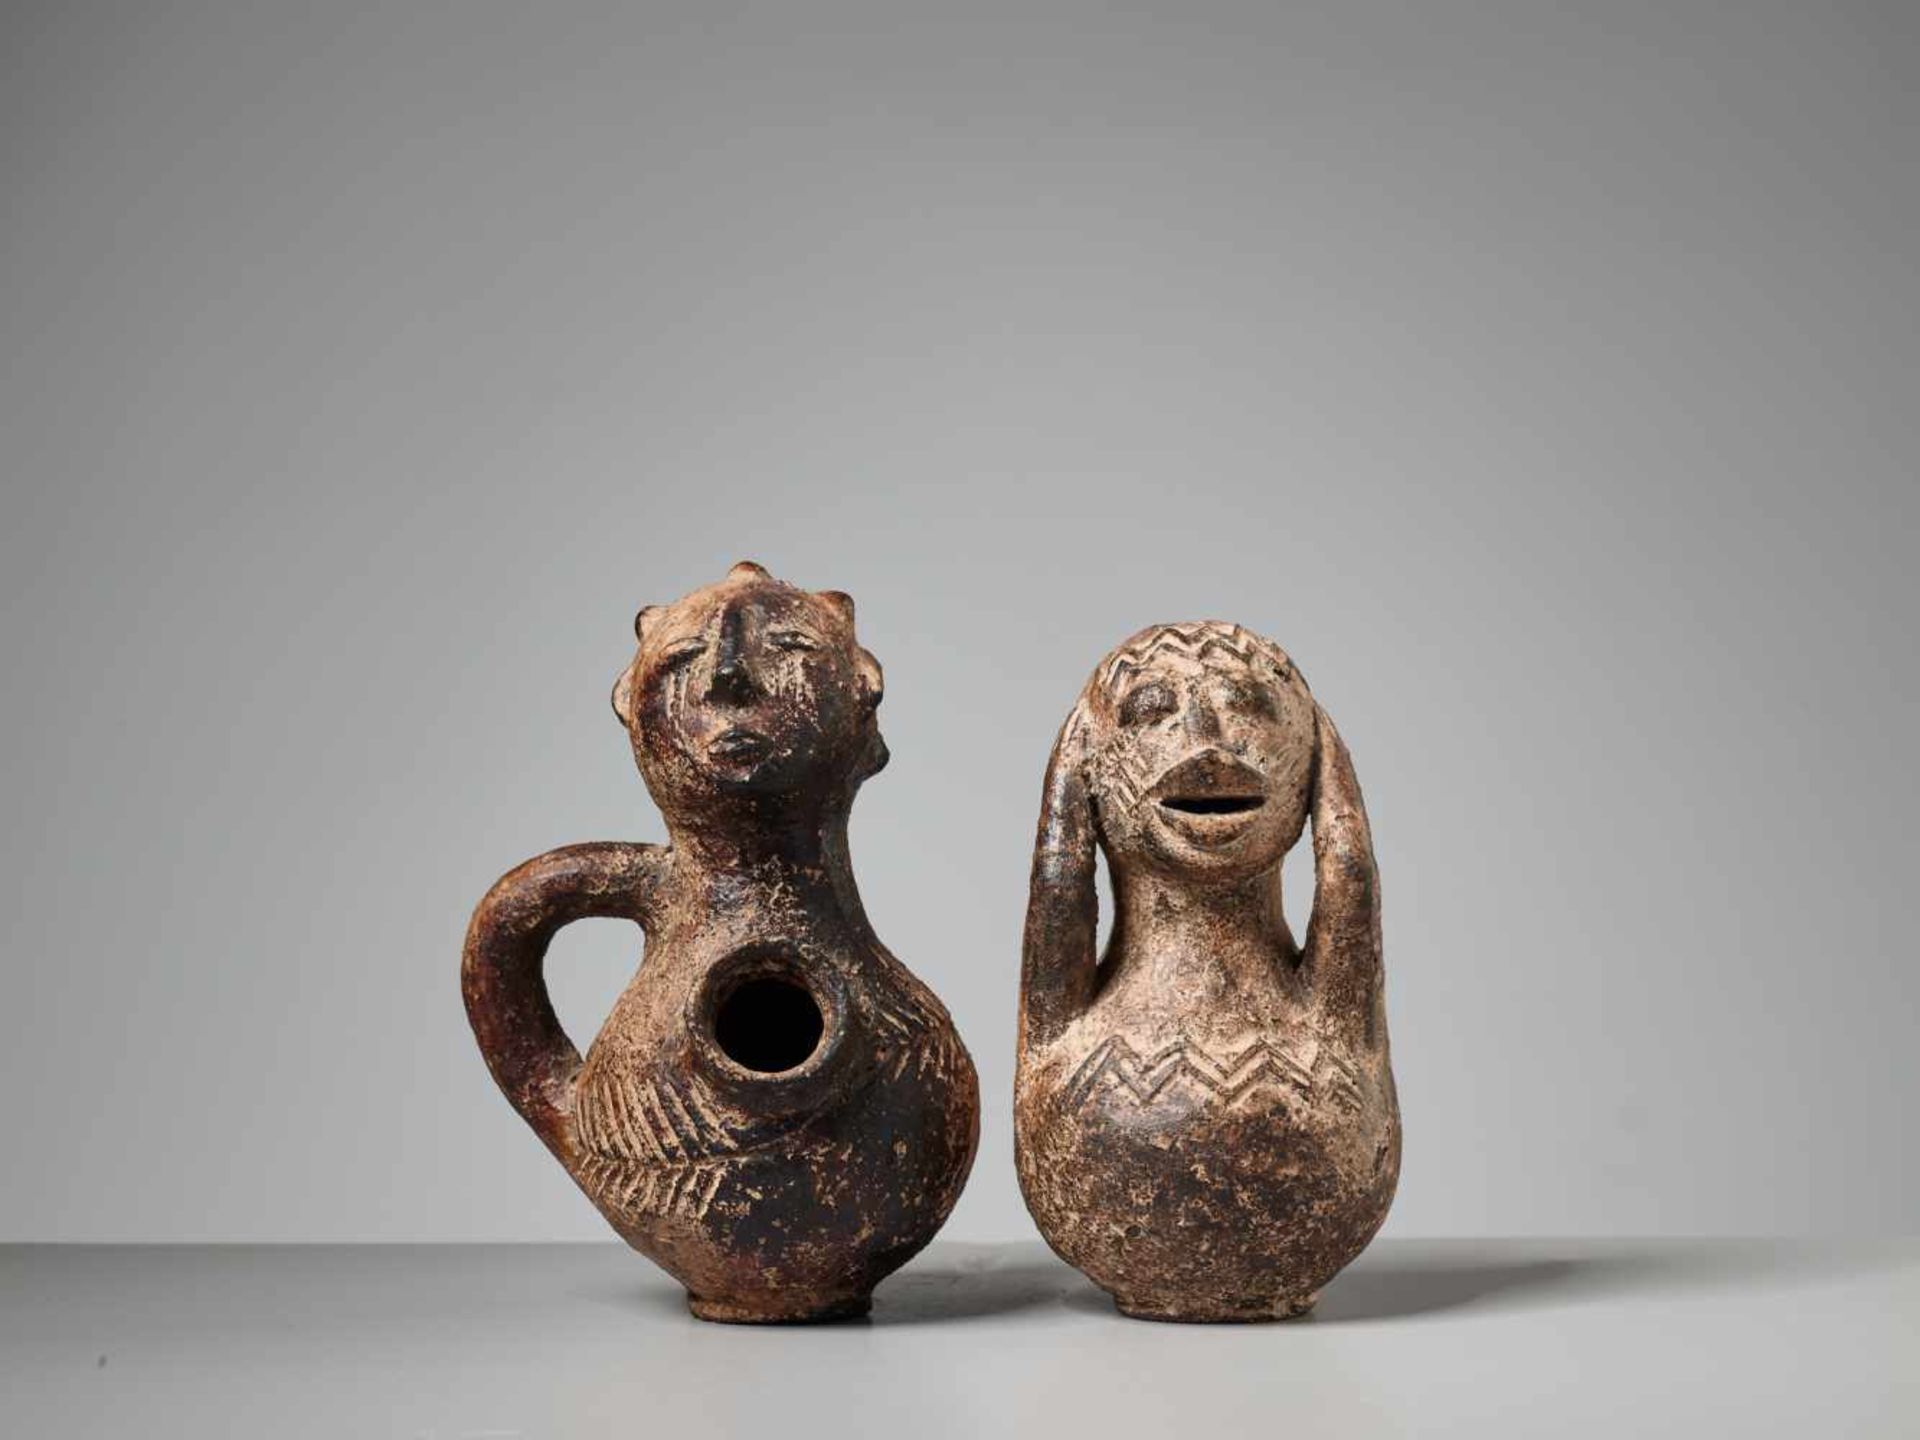 AFRICAN TRIBAL ART, A PAIR OF FIGURAL TERRACOTTA VESSELSTerracotta with earthy glazeAfrica1st half